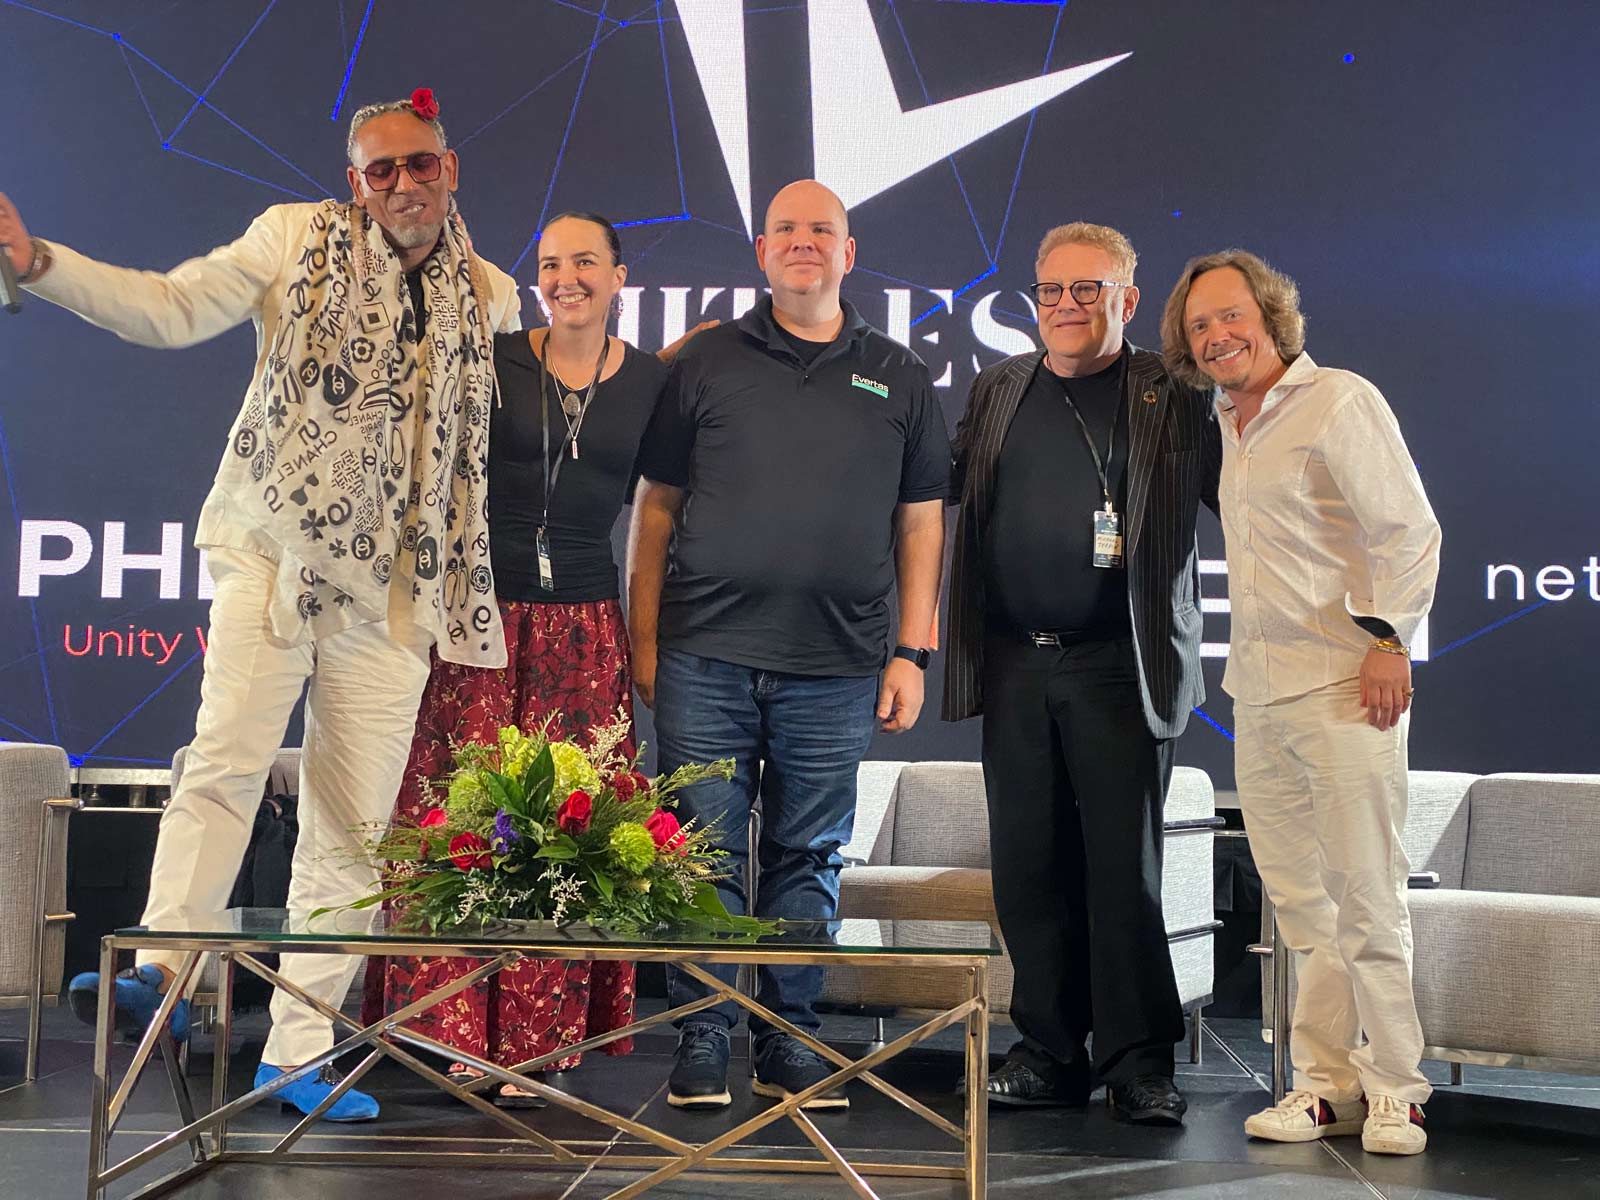 Speakers at Limitless included, from left, Pedro Rivera, Hannah Rosenberg, Ryan Lackey, Michael Terpin and Brock Pierce.